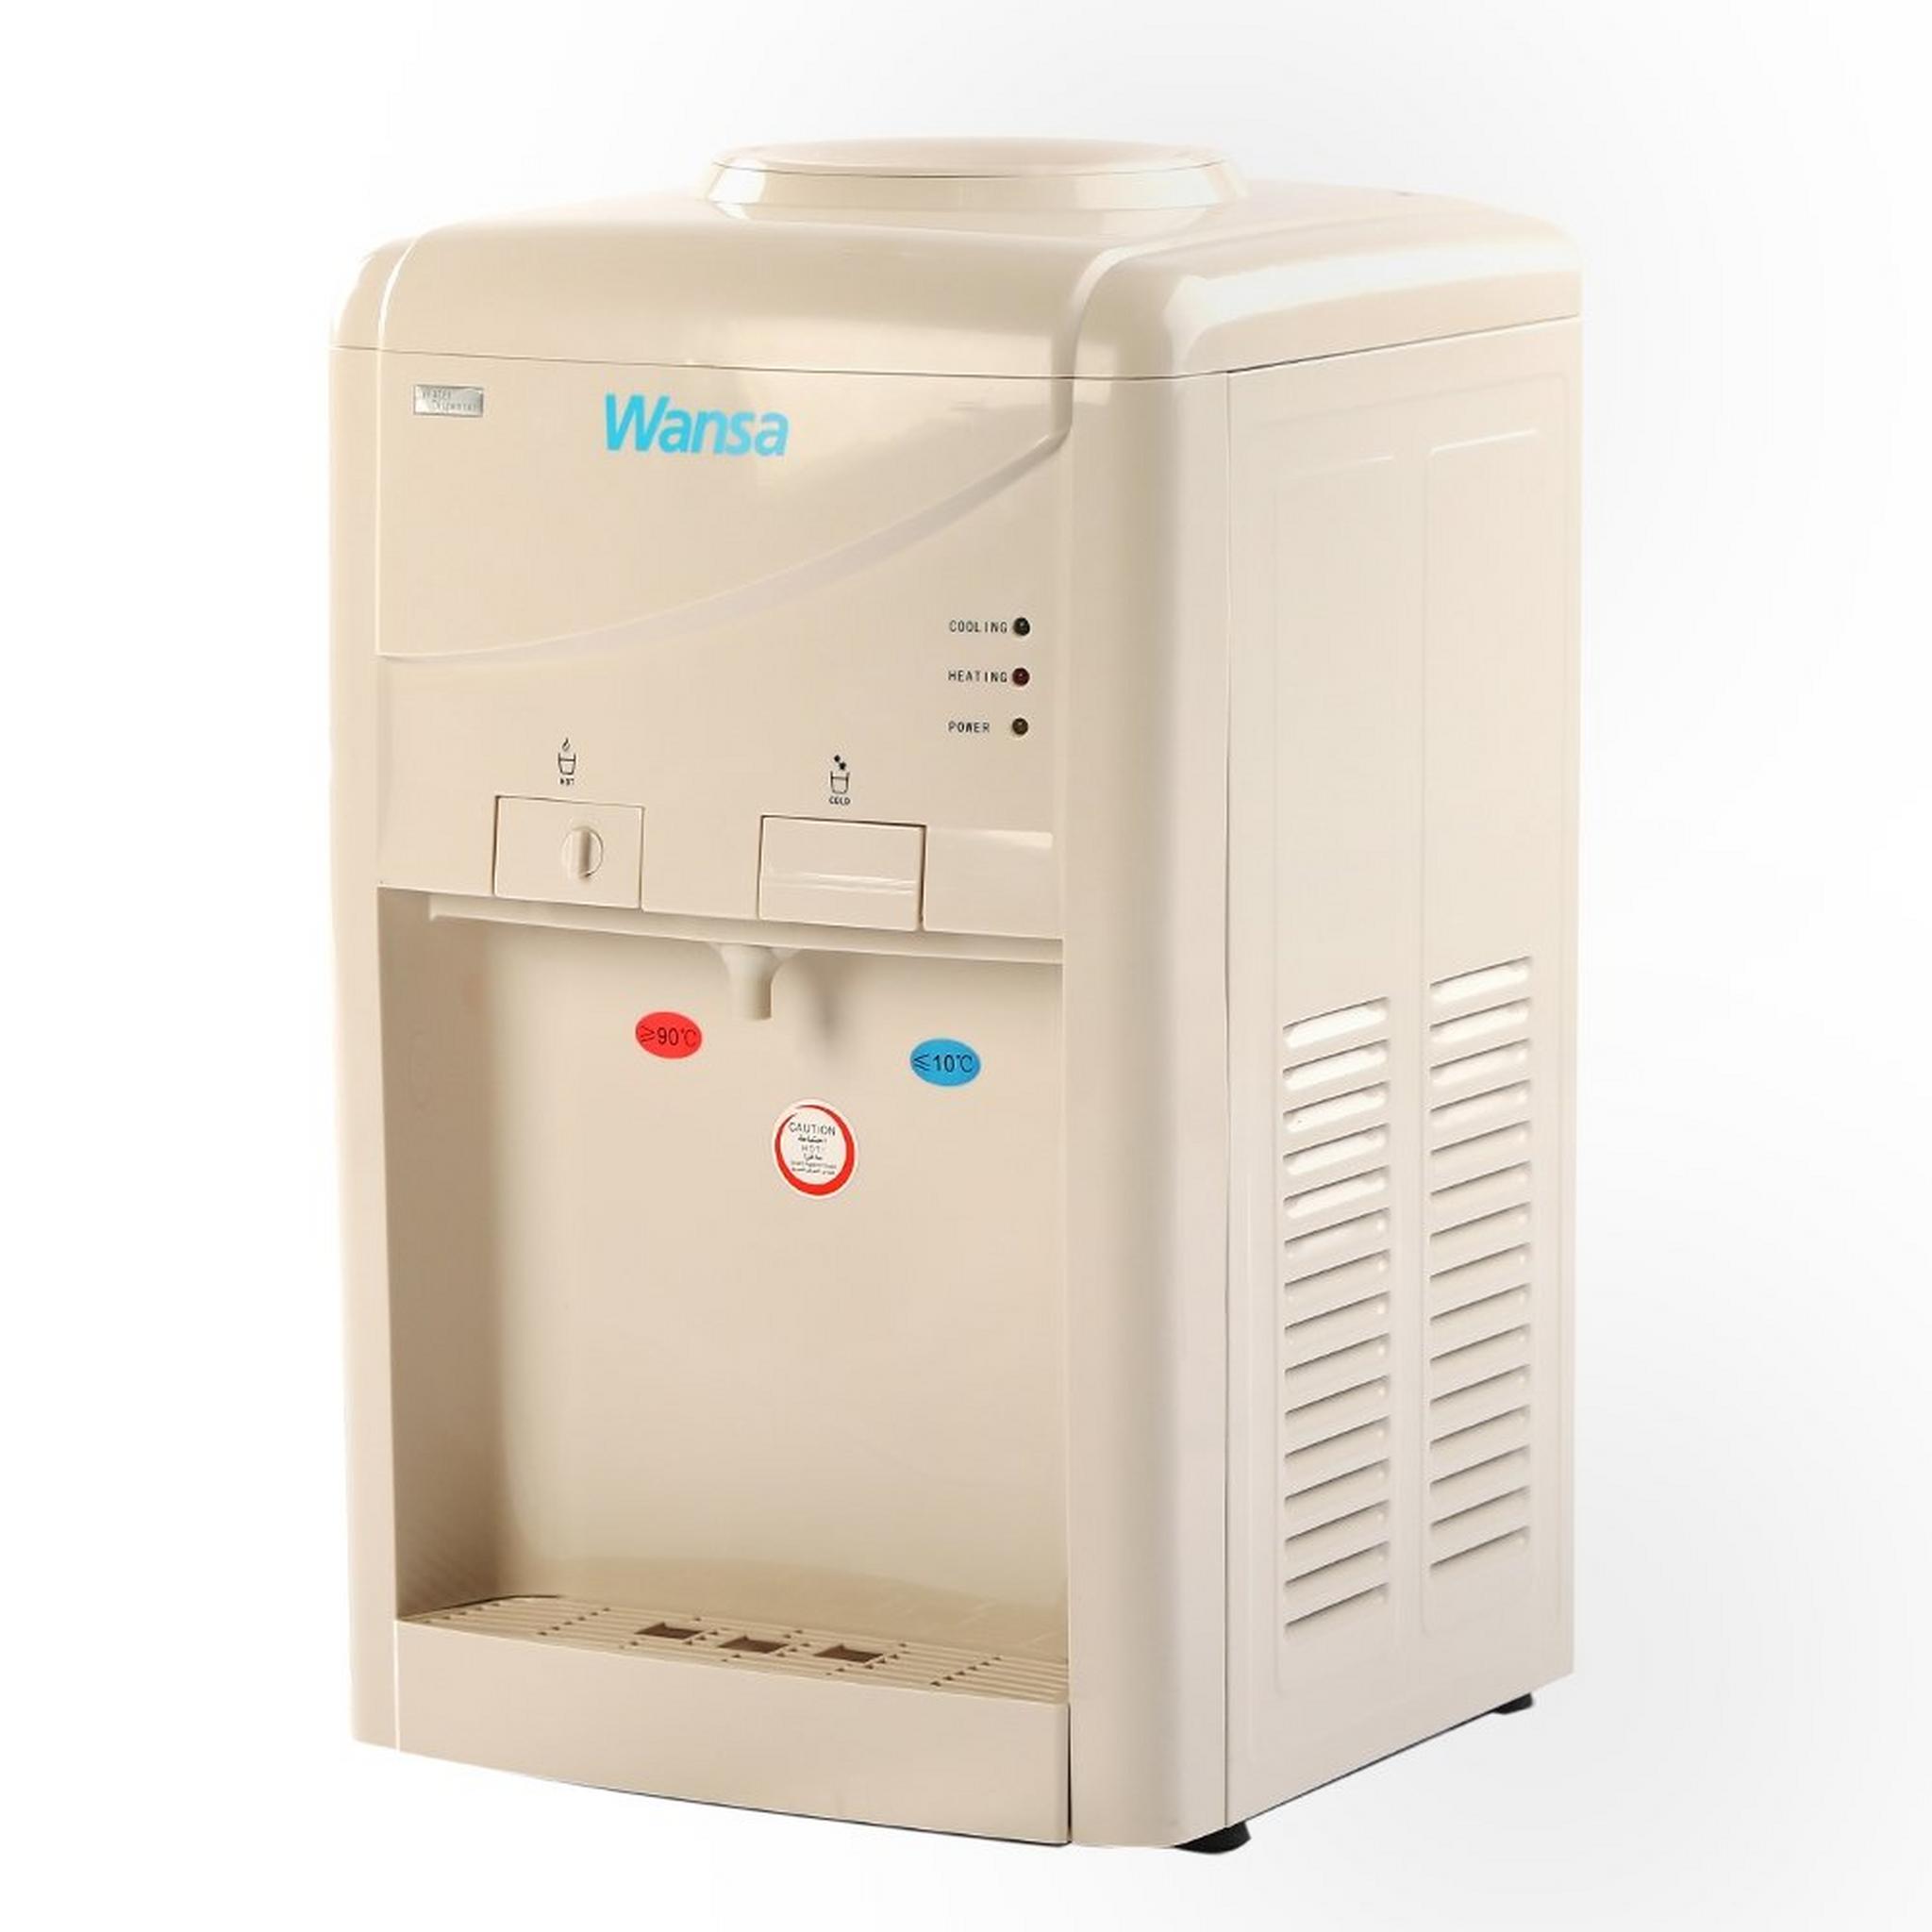 Wansa Water Dispenser - Hot & Cold / Table Top